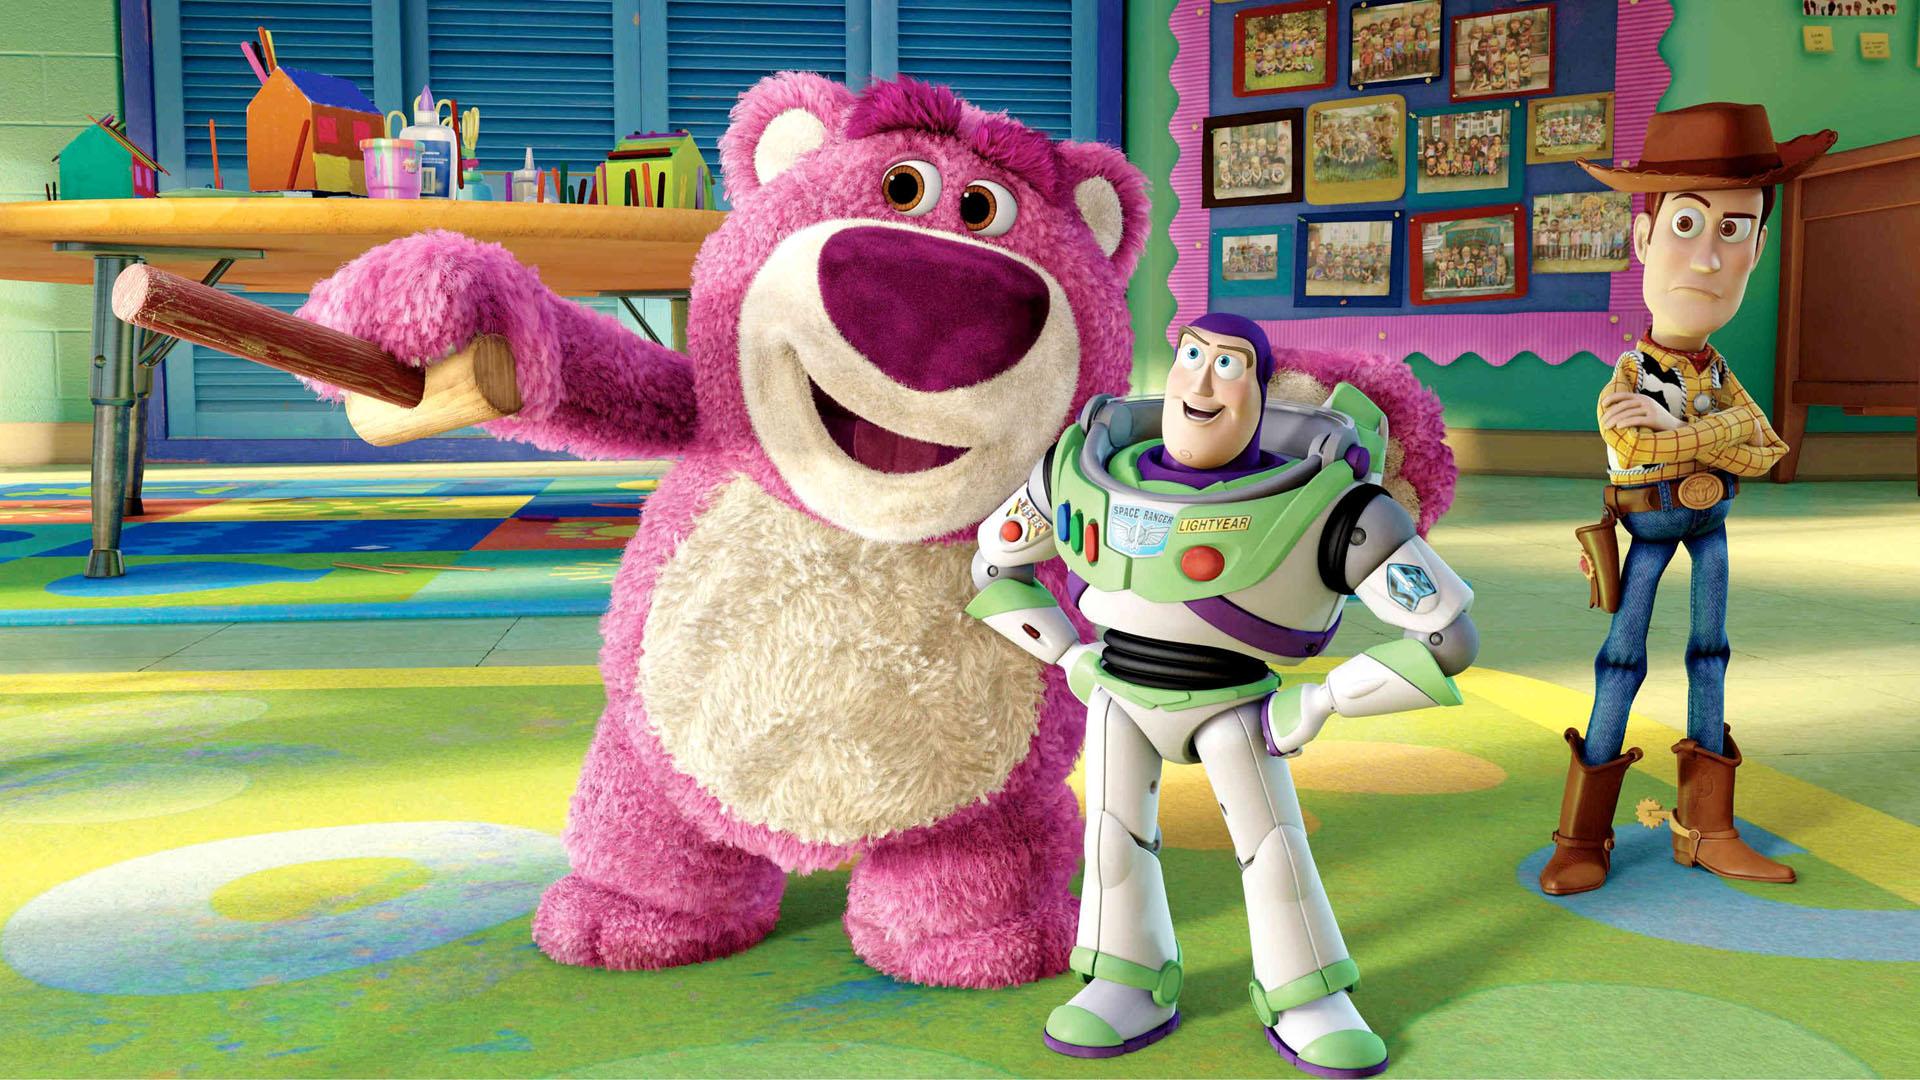 Toy Story 1920x1080 Wallpapers, 1920x1080 Wallpapers & Pictures ...